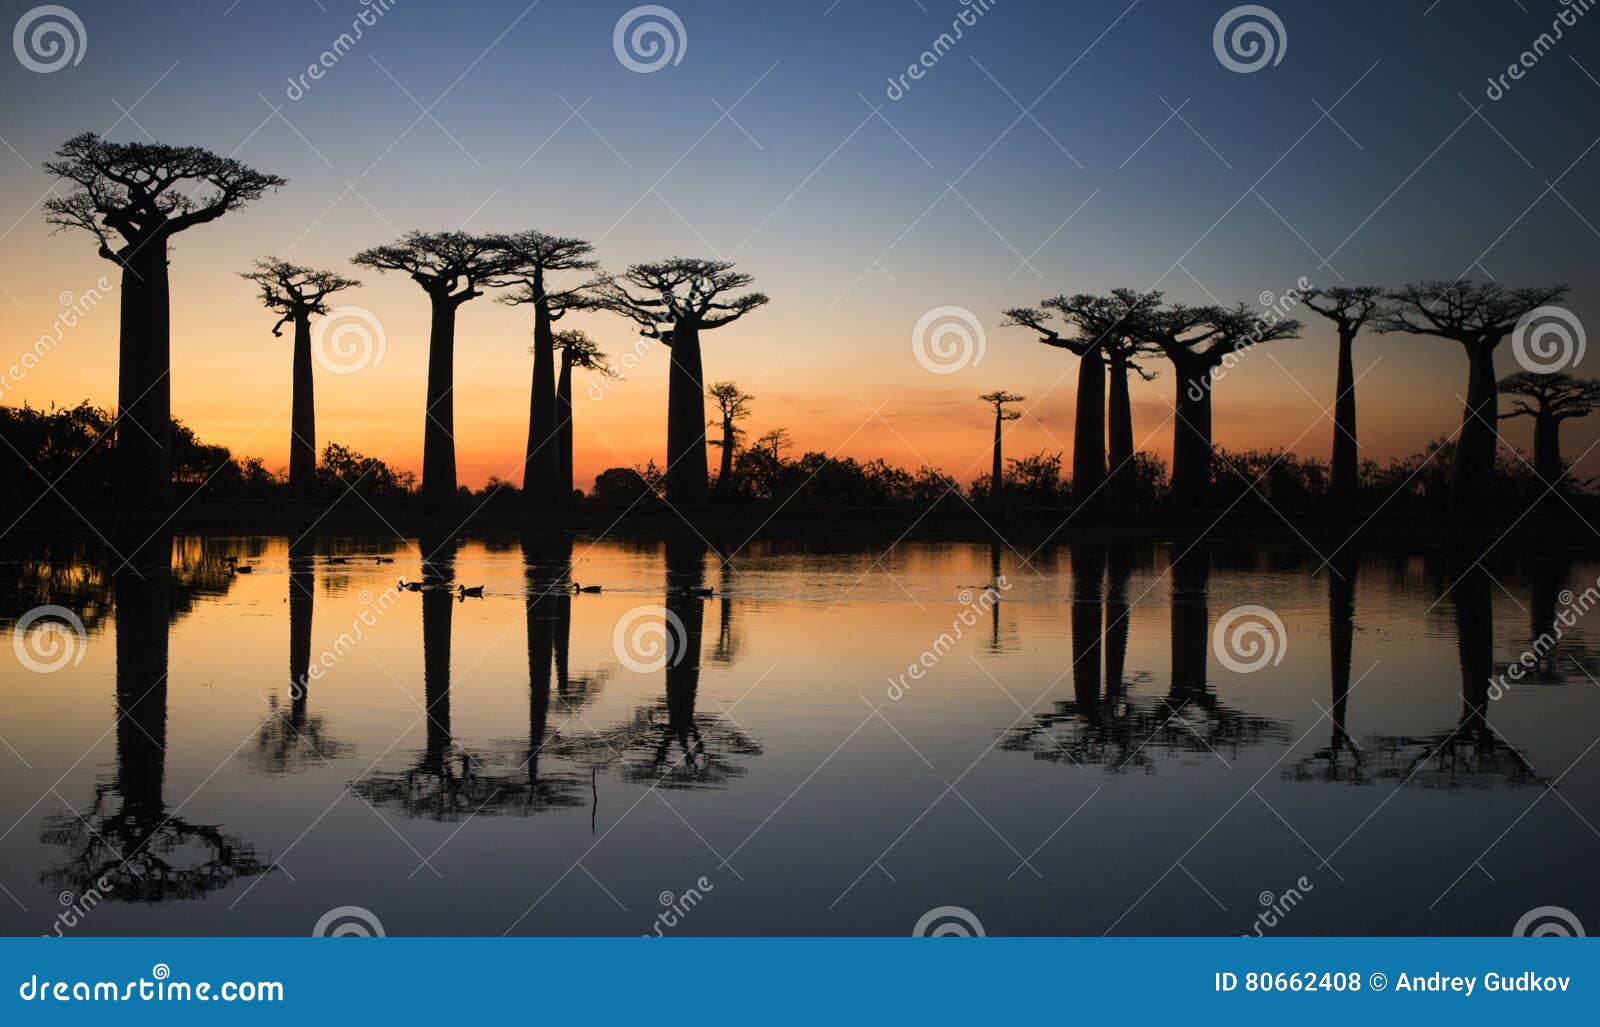 baobabs at sunrise near the water with reflection. madagascar.